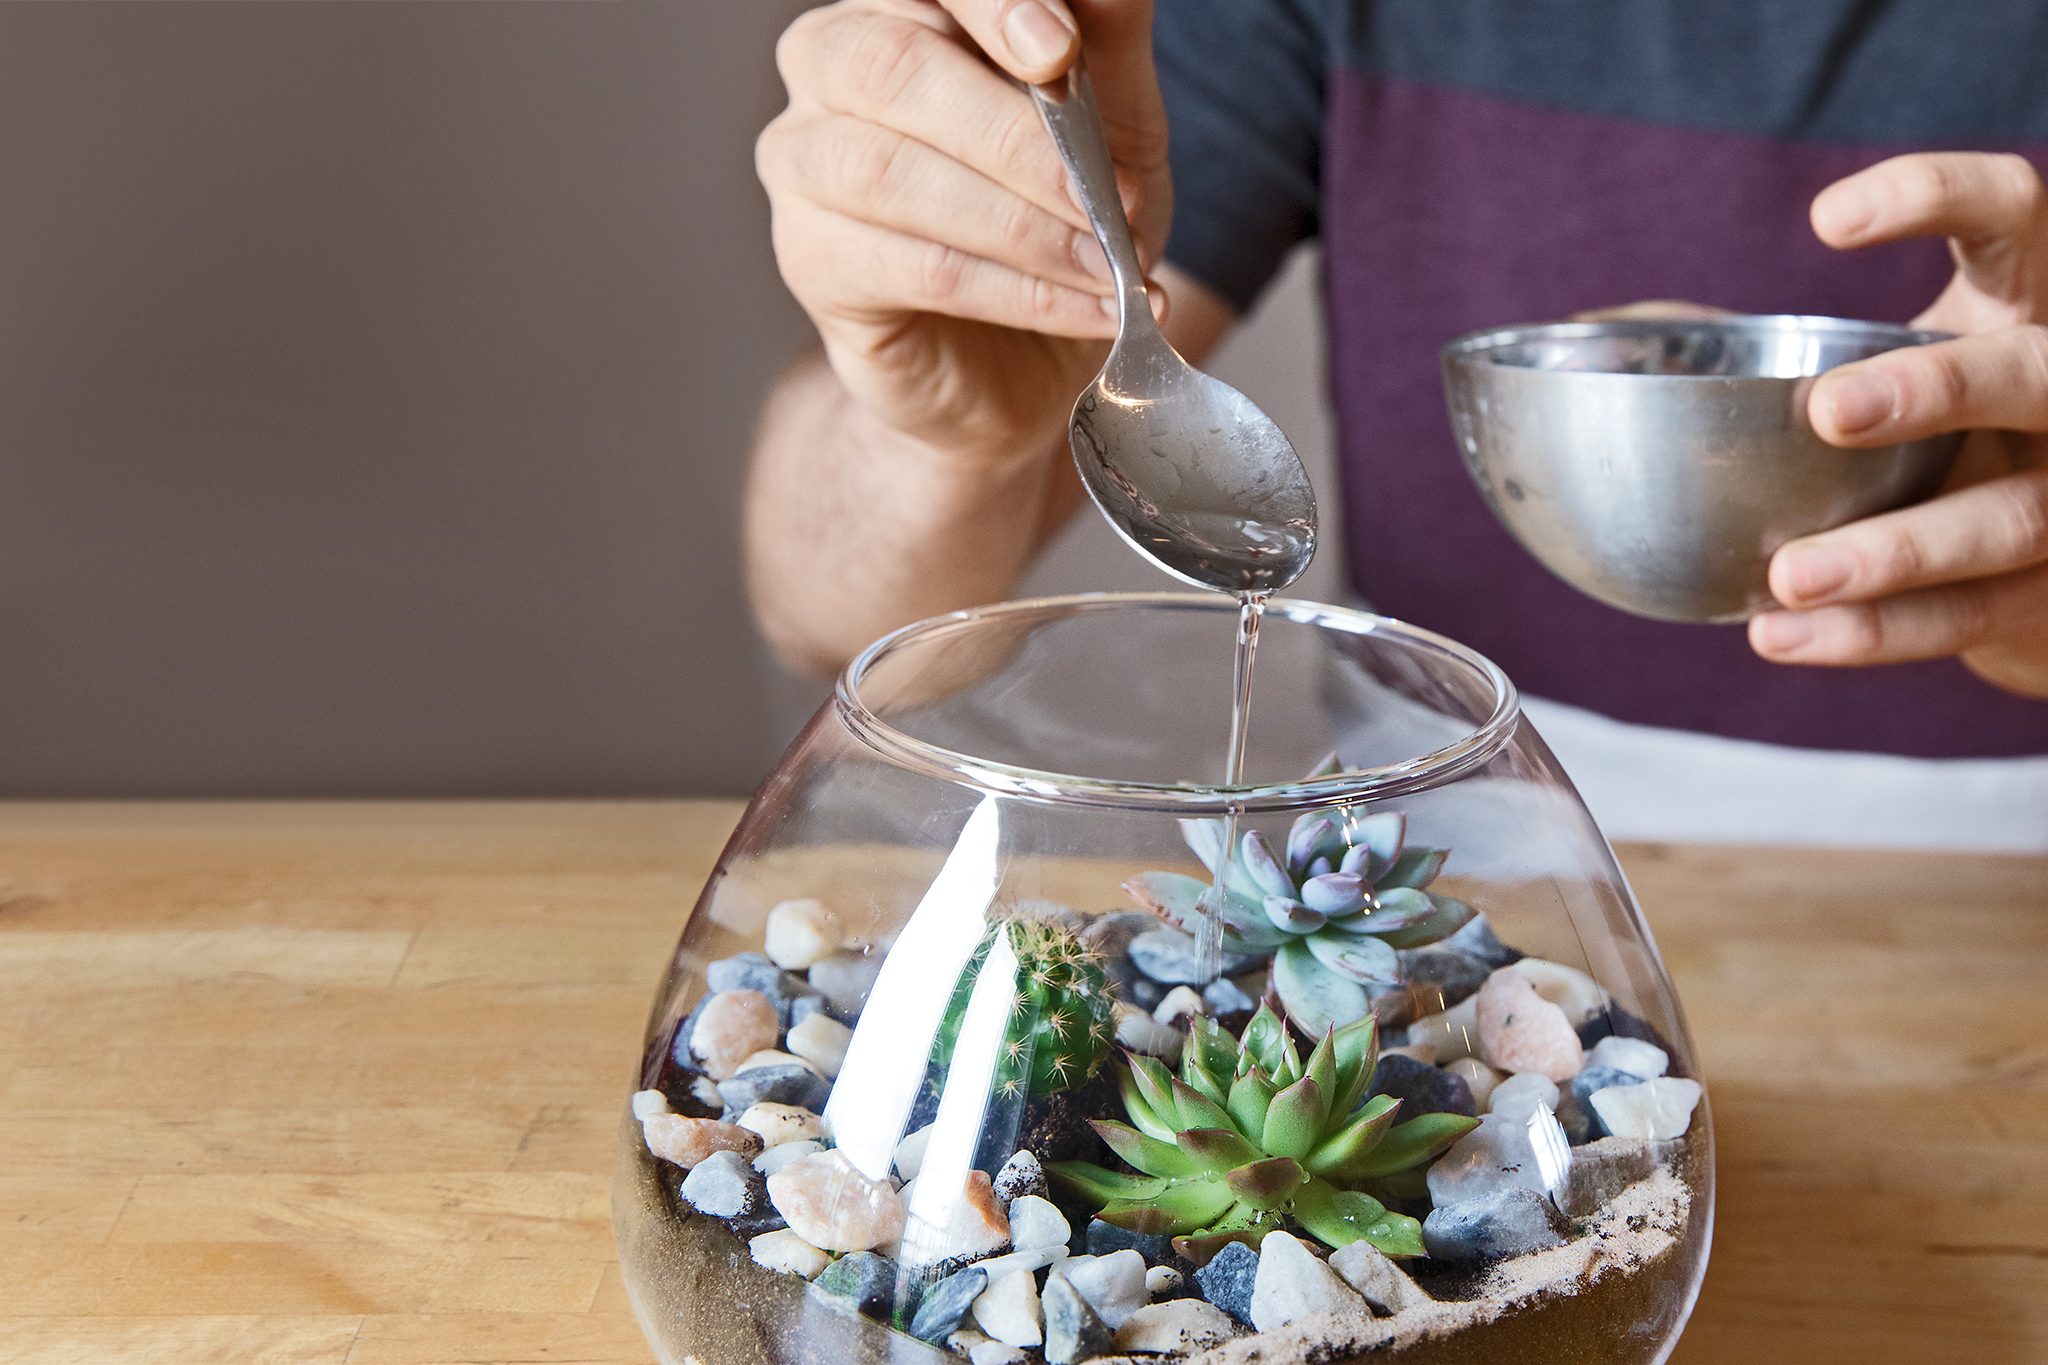 A man carefully watering a glass bowl filled with rocks and plants,